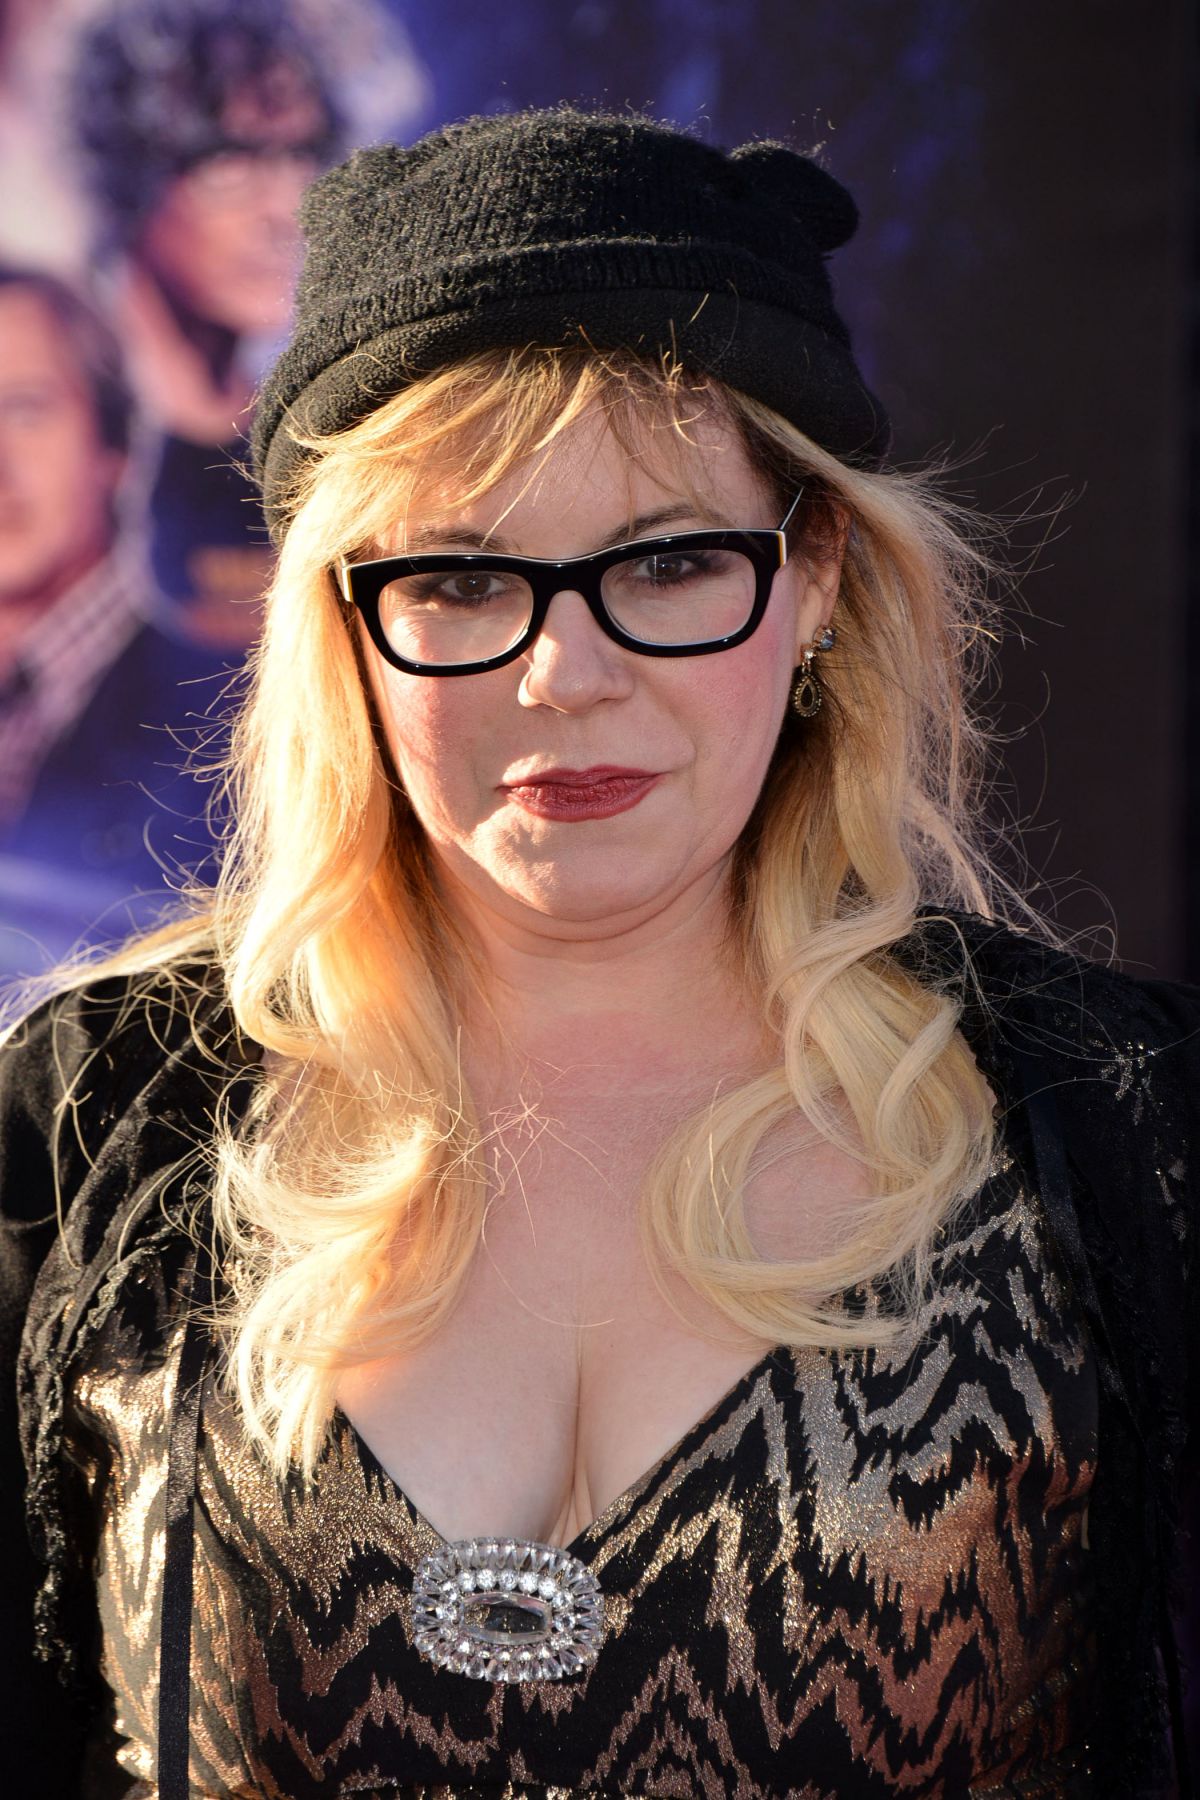 KIRSTEN VANGSNESS at Ready Player One Premiere in Los Angeles 03/26/2018.